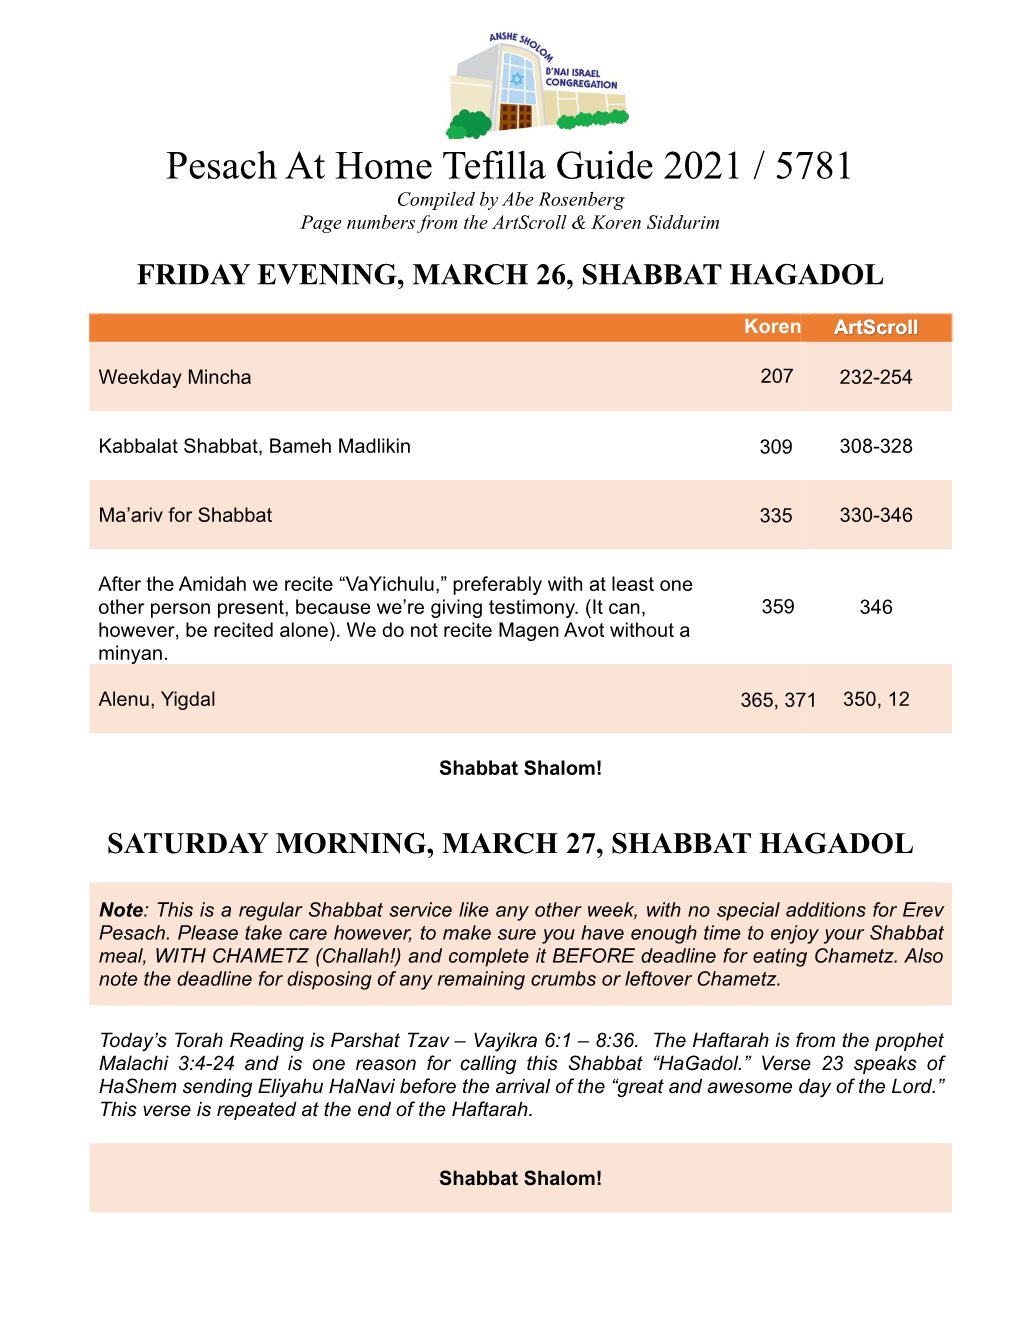 Pesach at Home Tefilla Guide 2021 / 5781 Compiled by Abe Rosenberg Page Numbers from the Artscroll & Koren Siddurim FRIDAY EVENING, MARCH 26, SHABBAT HAGADOL